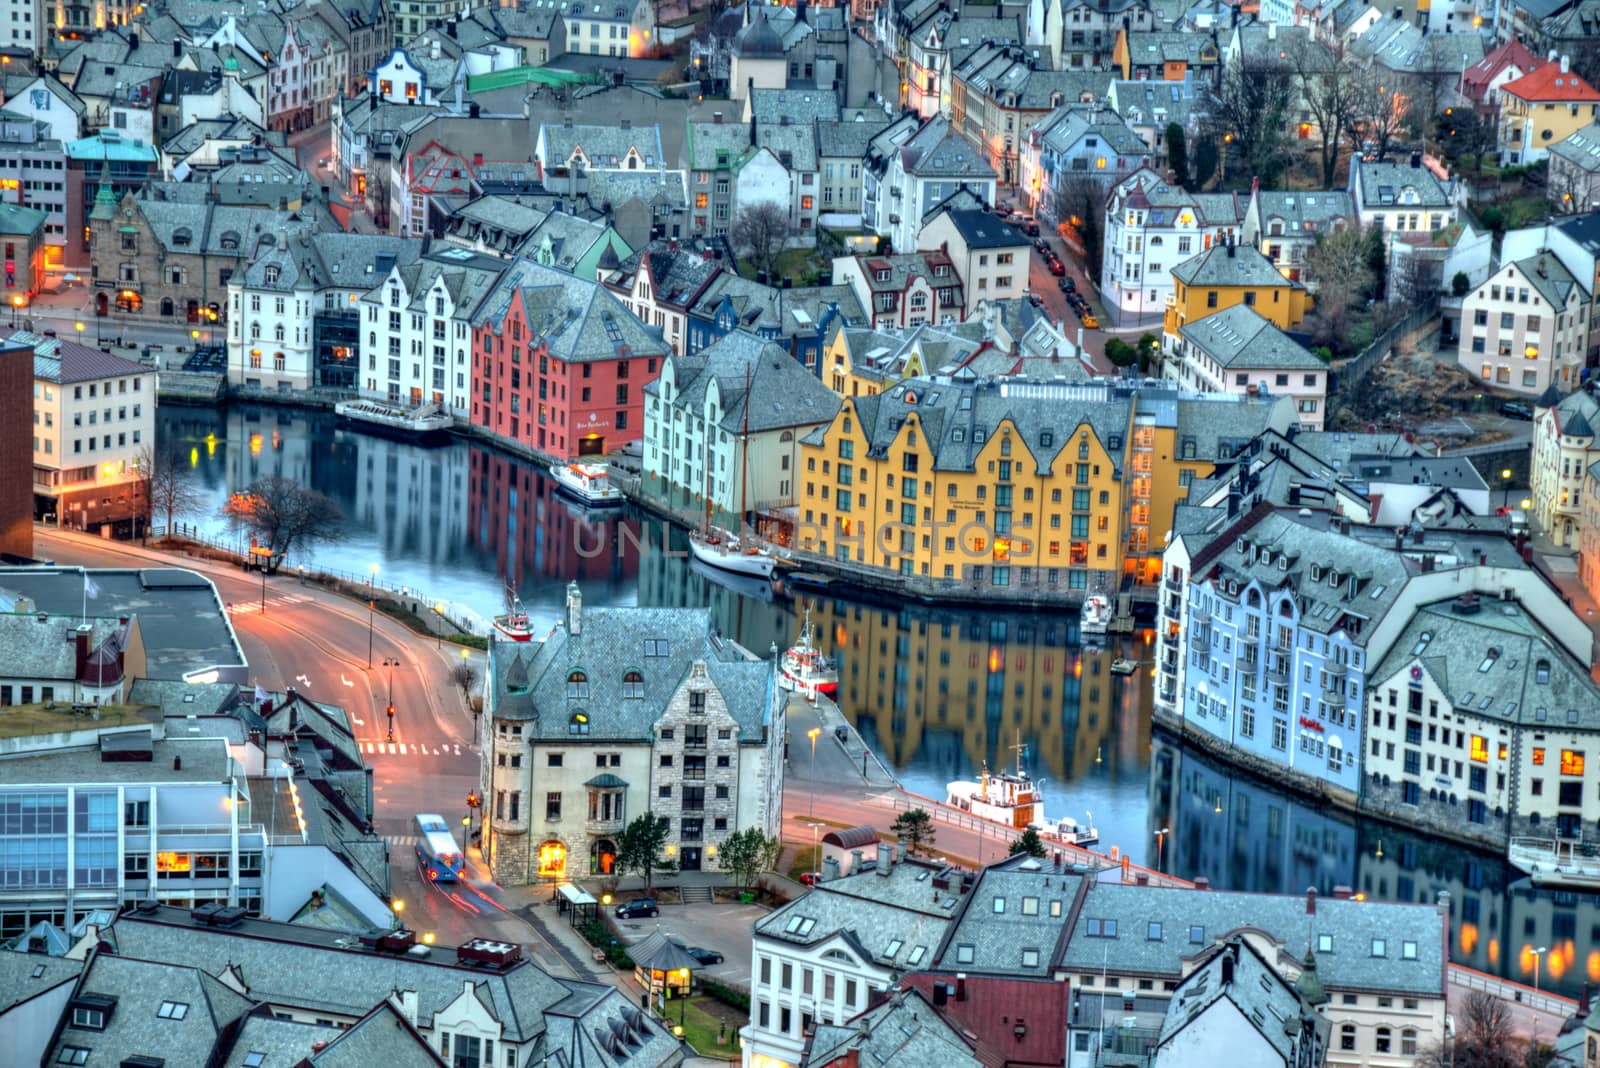 City of Alesund in Norway by anderm